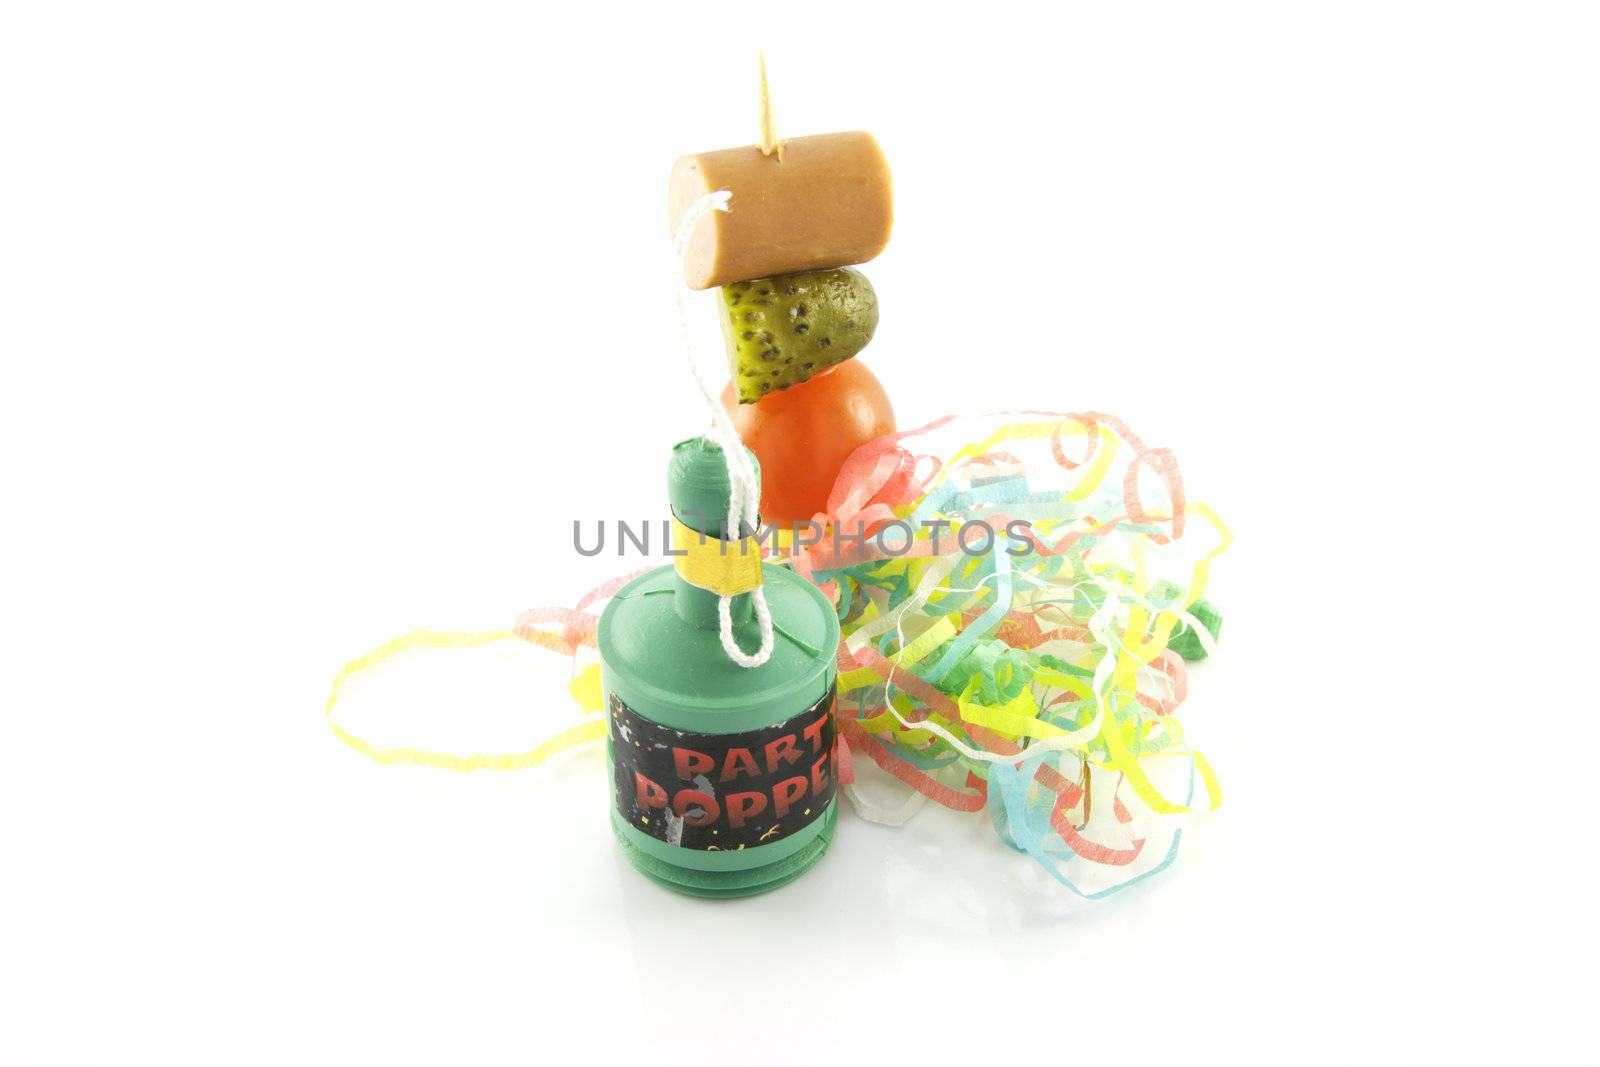 Single cocktail stick with sausage, gherkin and tomato with streamers and party popper on a reflective white background